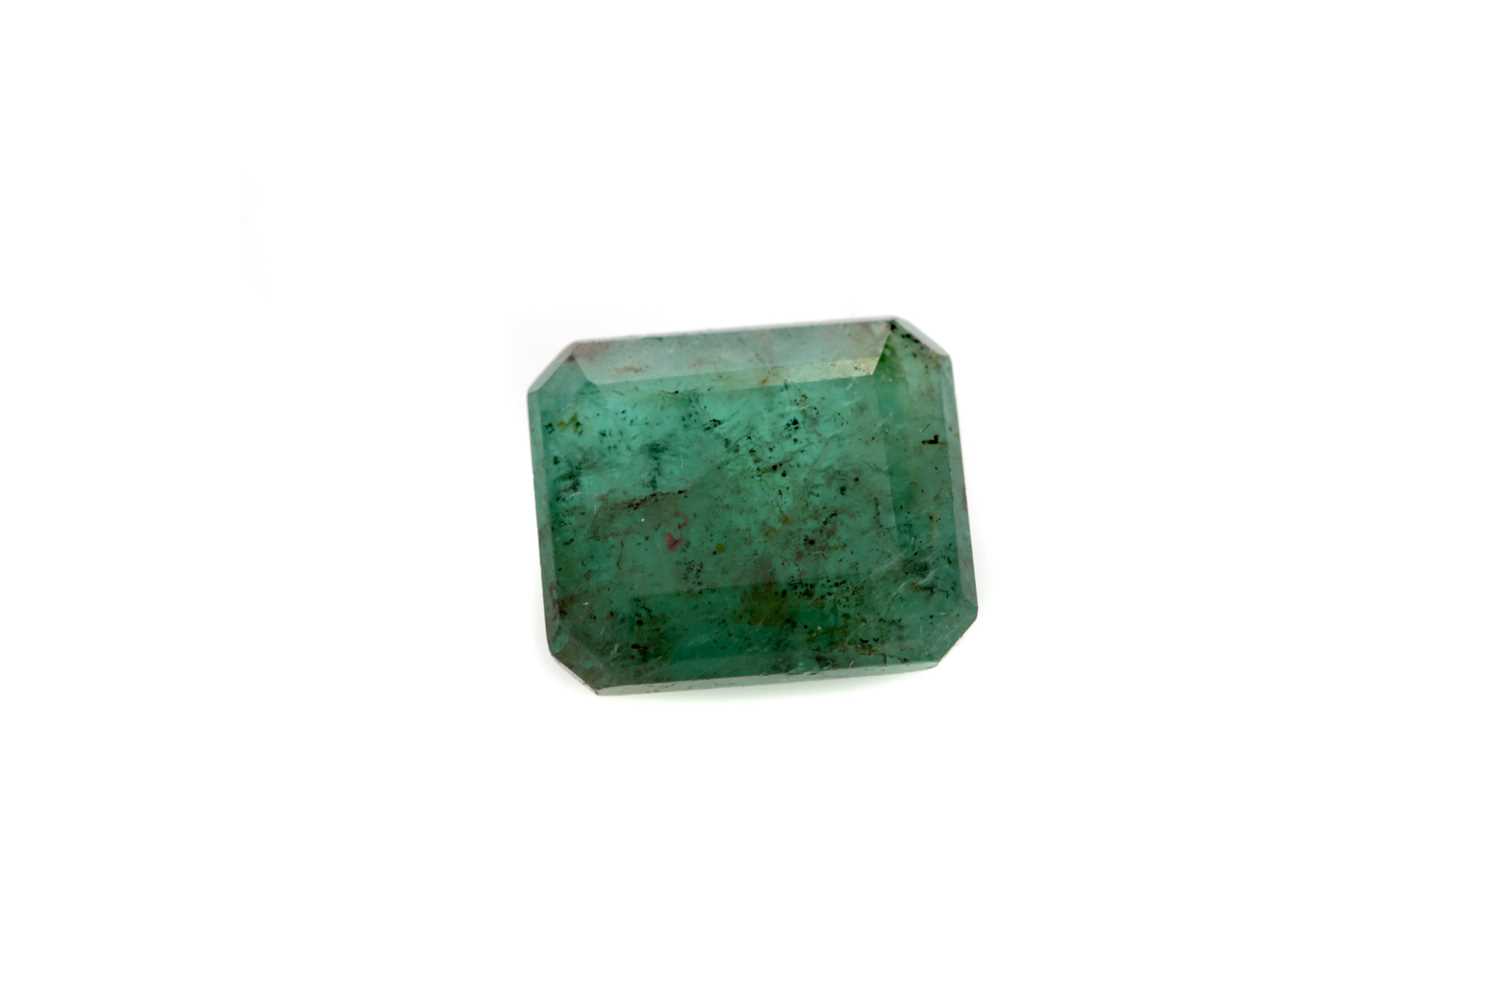 Lot 375 - A CERTIFICATED UNMOUNTED EMERALD